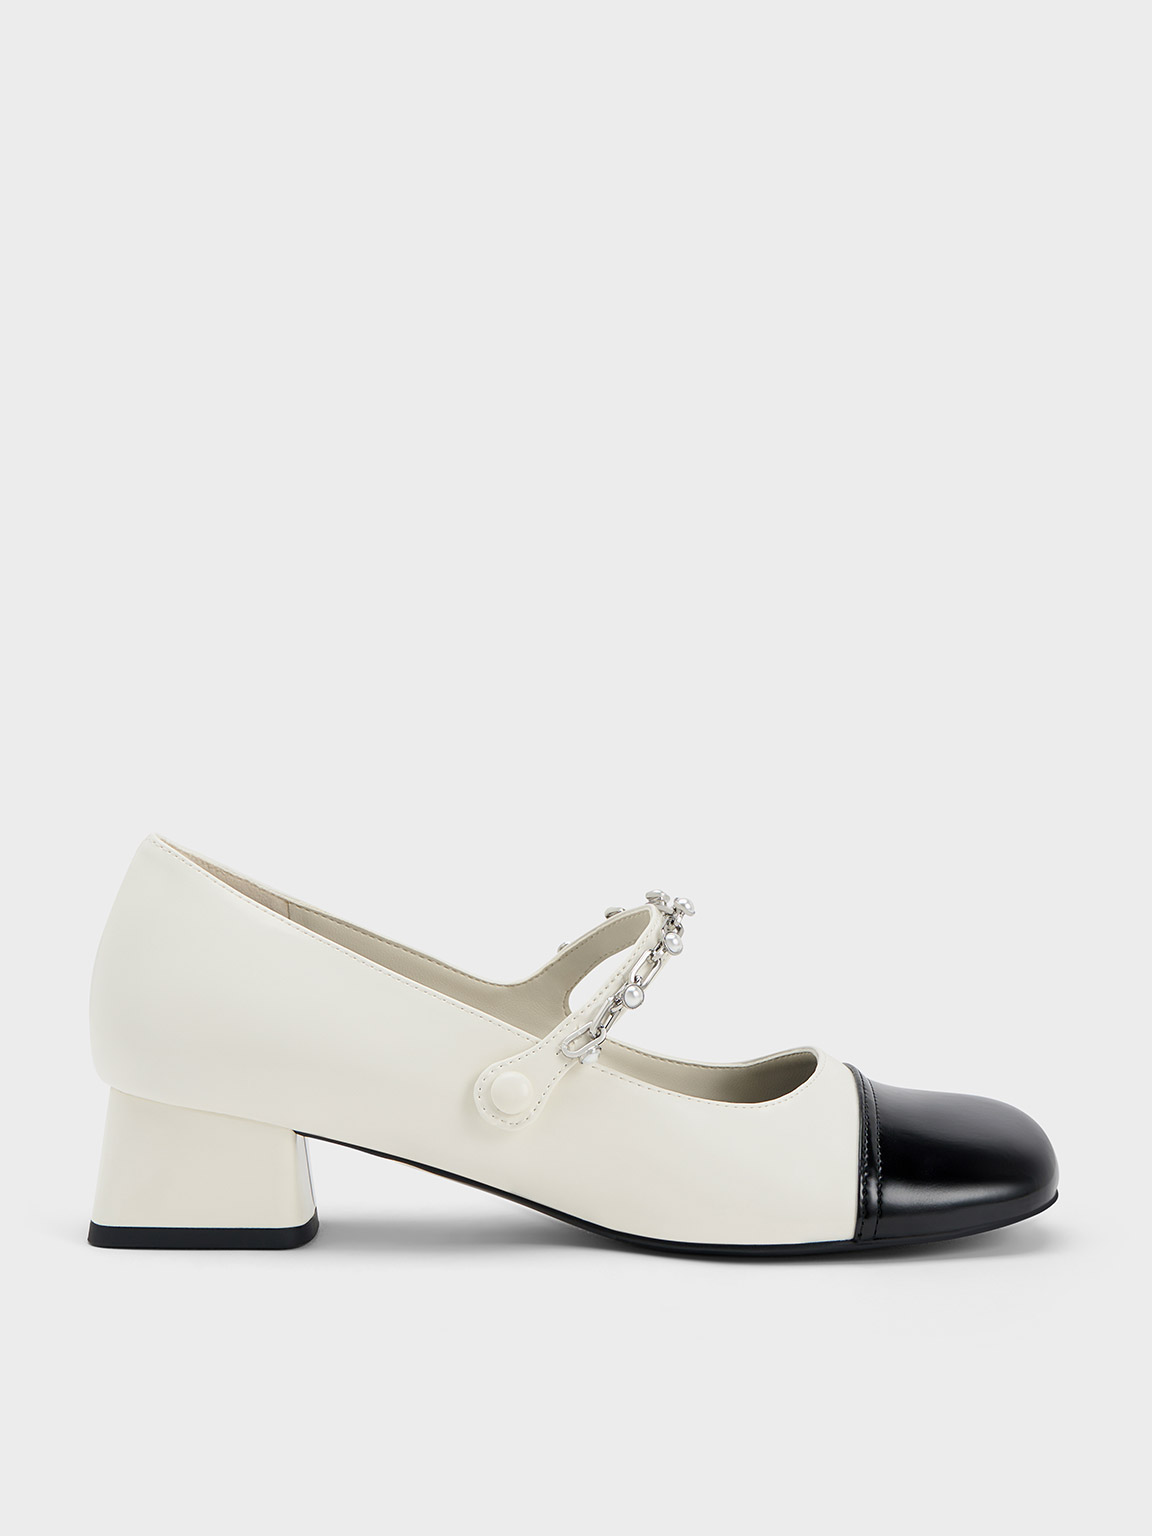 Charles Keith Shoes Size, Heel Mary Jane Shoes, Mary Fashion, Mary Women